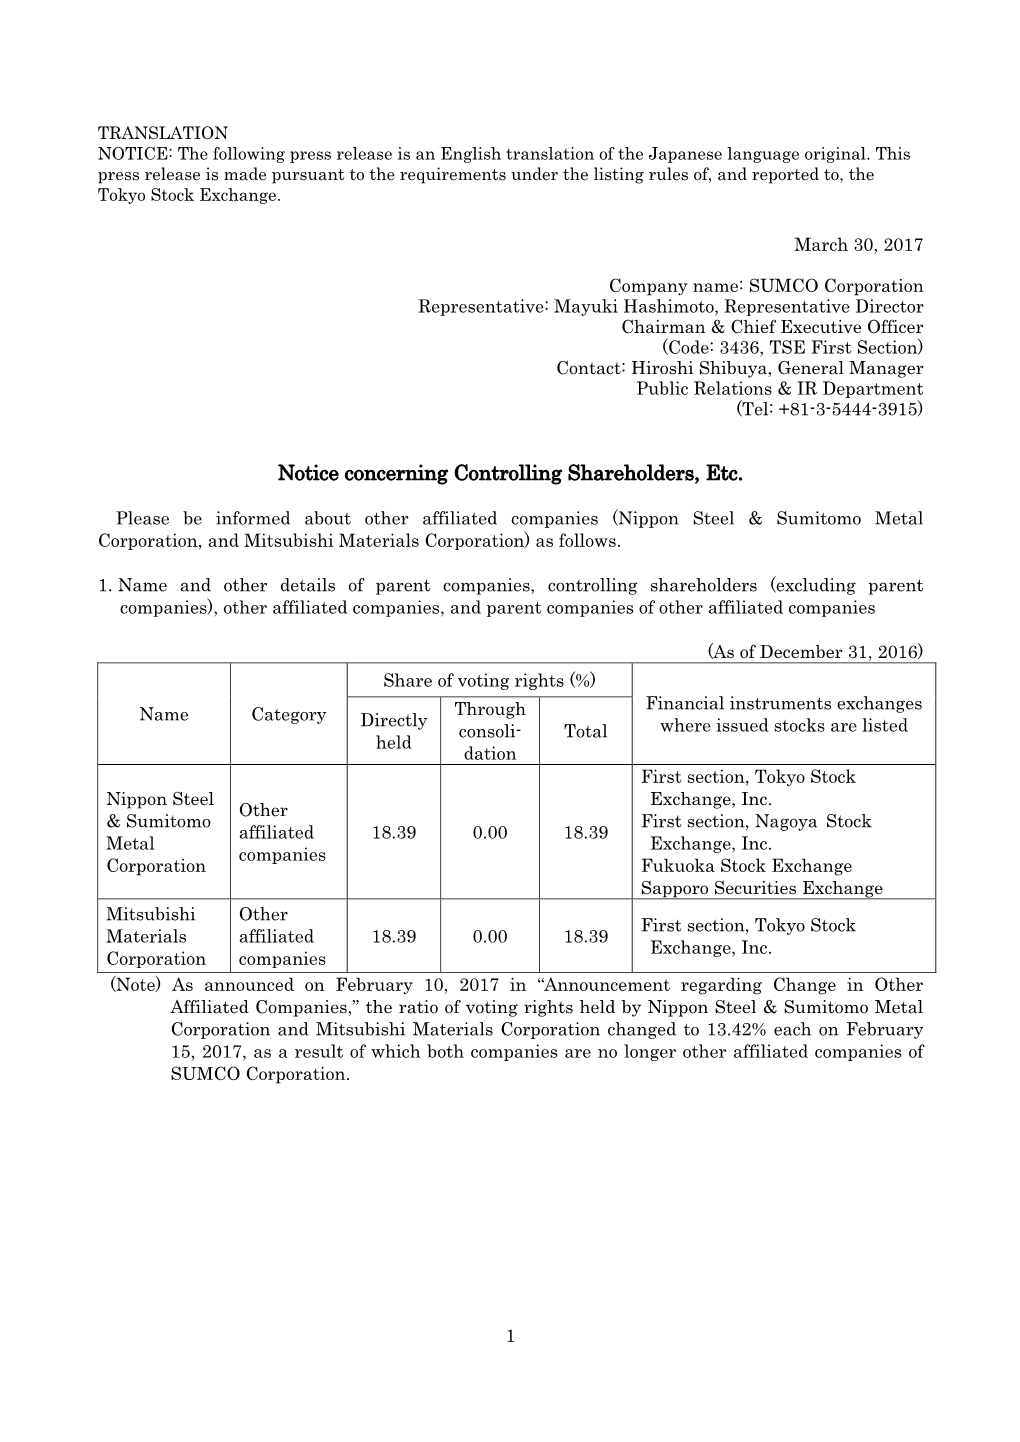 SUMCO (3436) Notice Concerning Controlling Shareholders, Etc